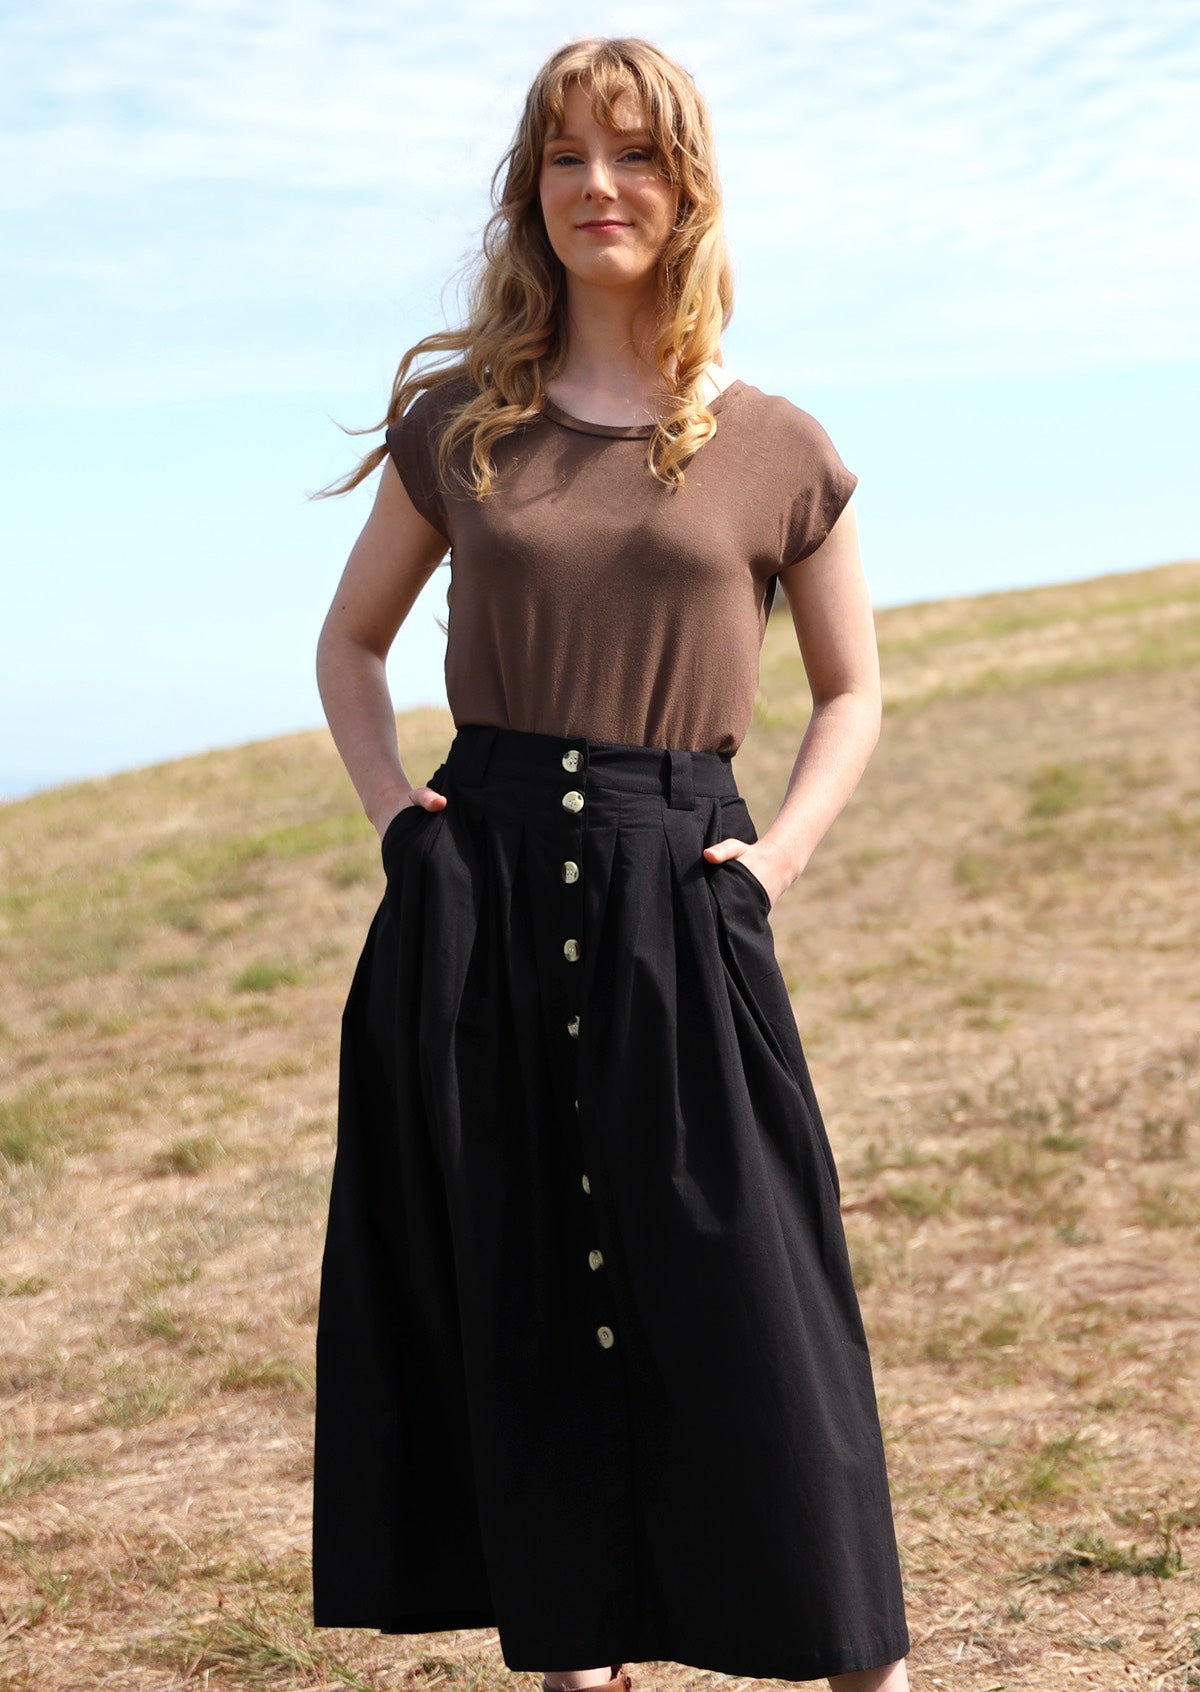 Cora Skirt full front button down closure belt loops box pleats maxi skirt with side pockets 100% cotton black | Karma East Australia